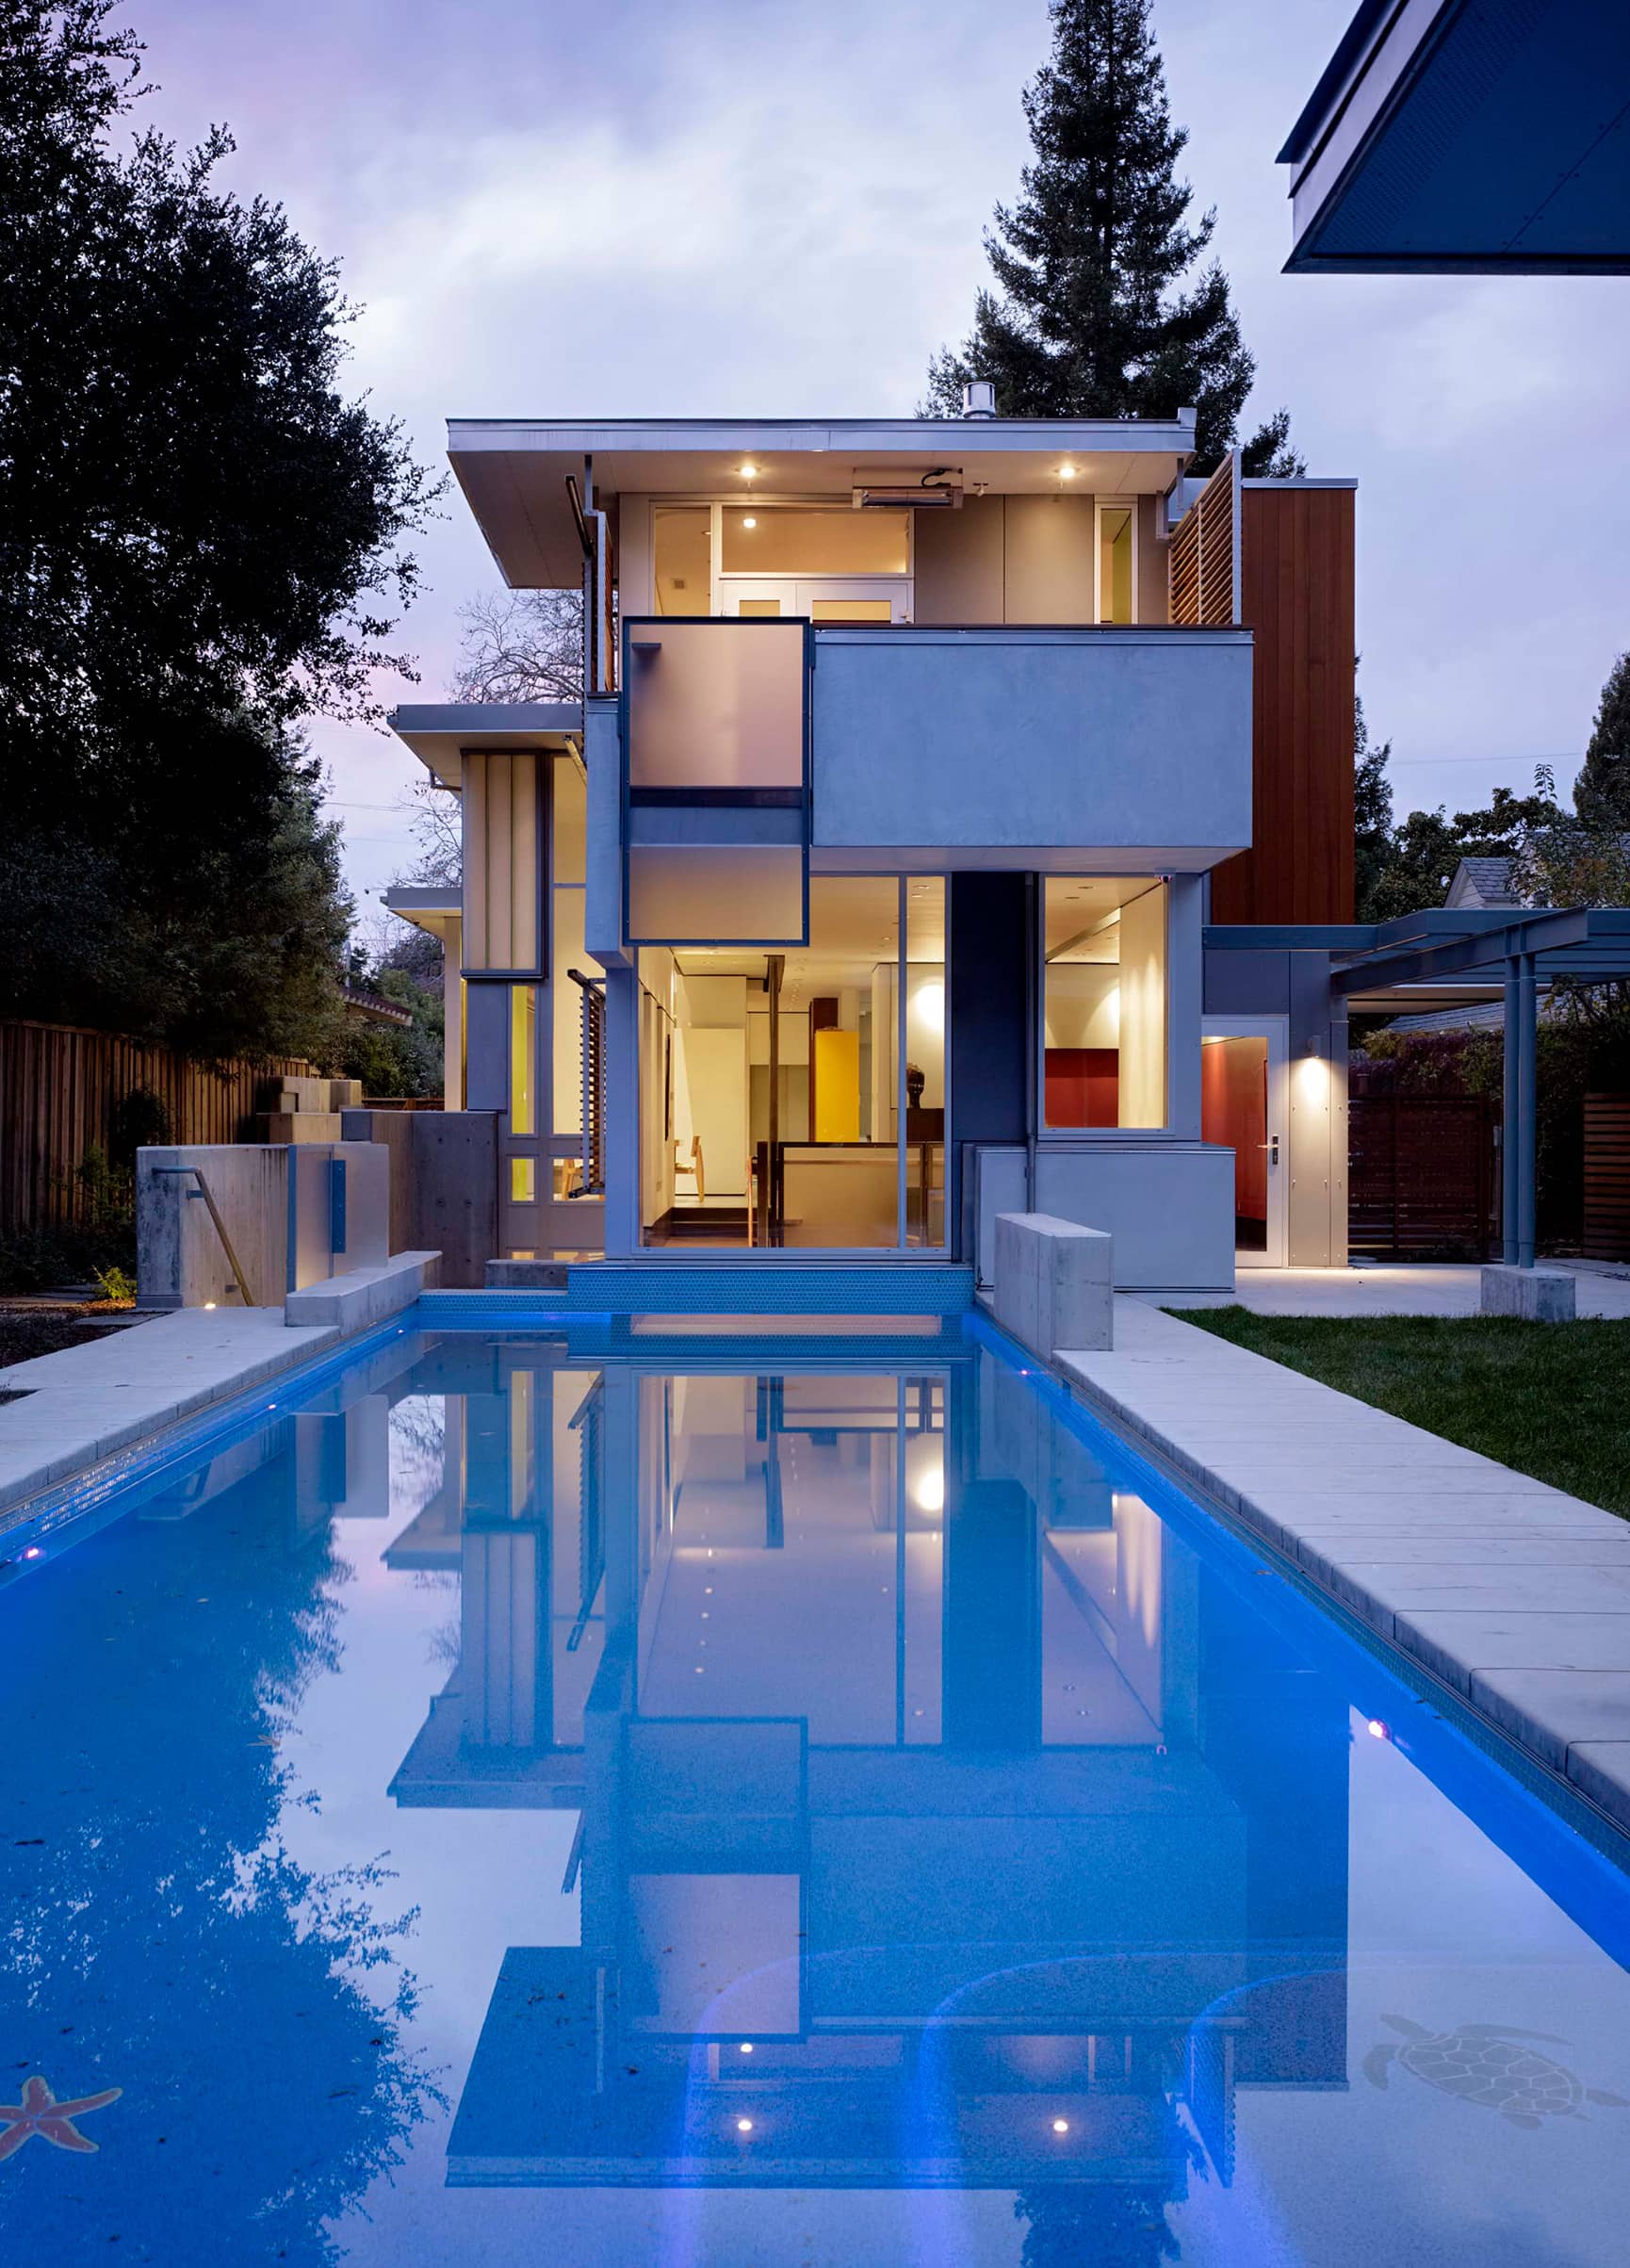 Bright blue pool attached to mid-century modern home.